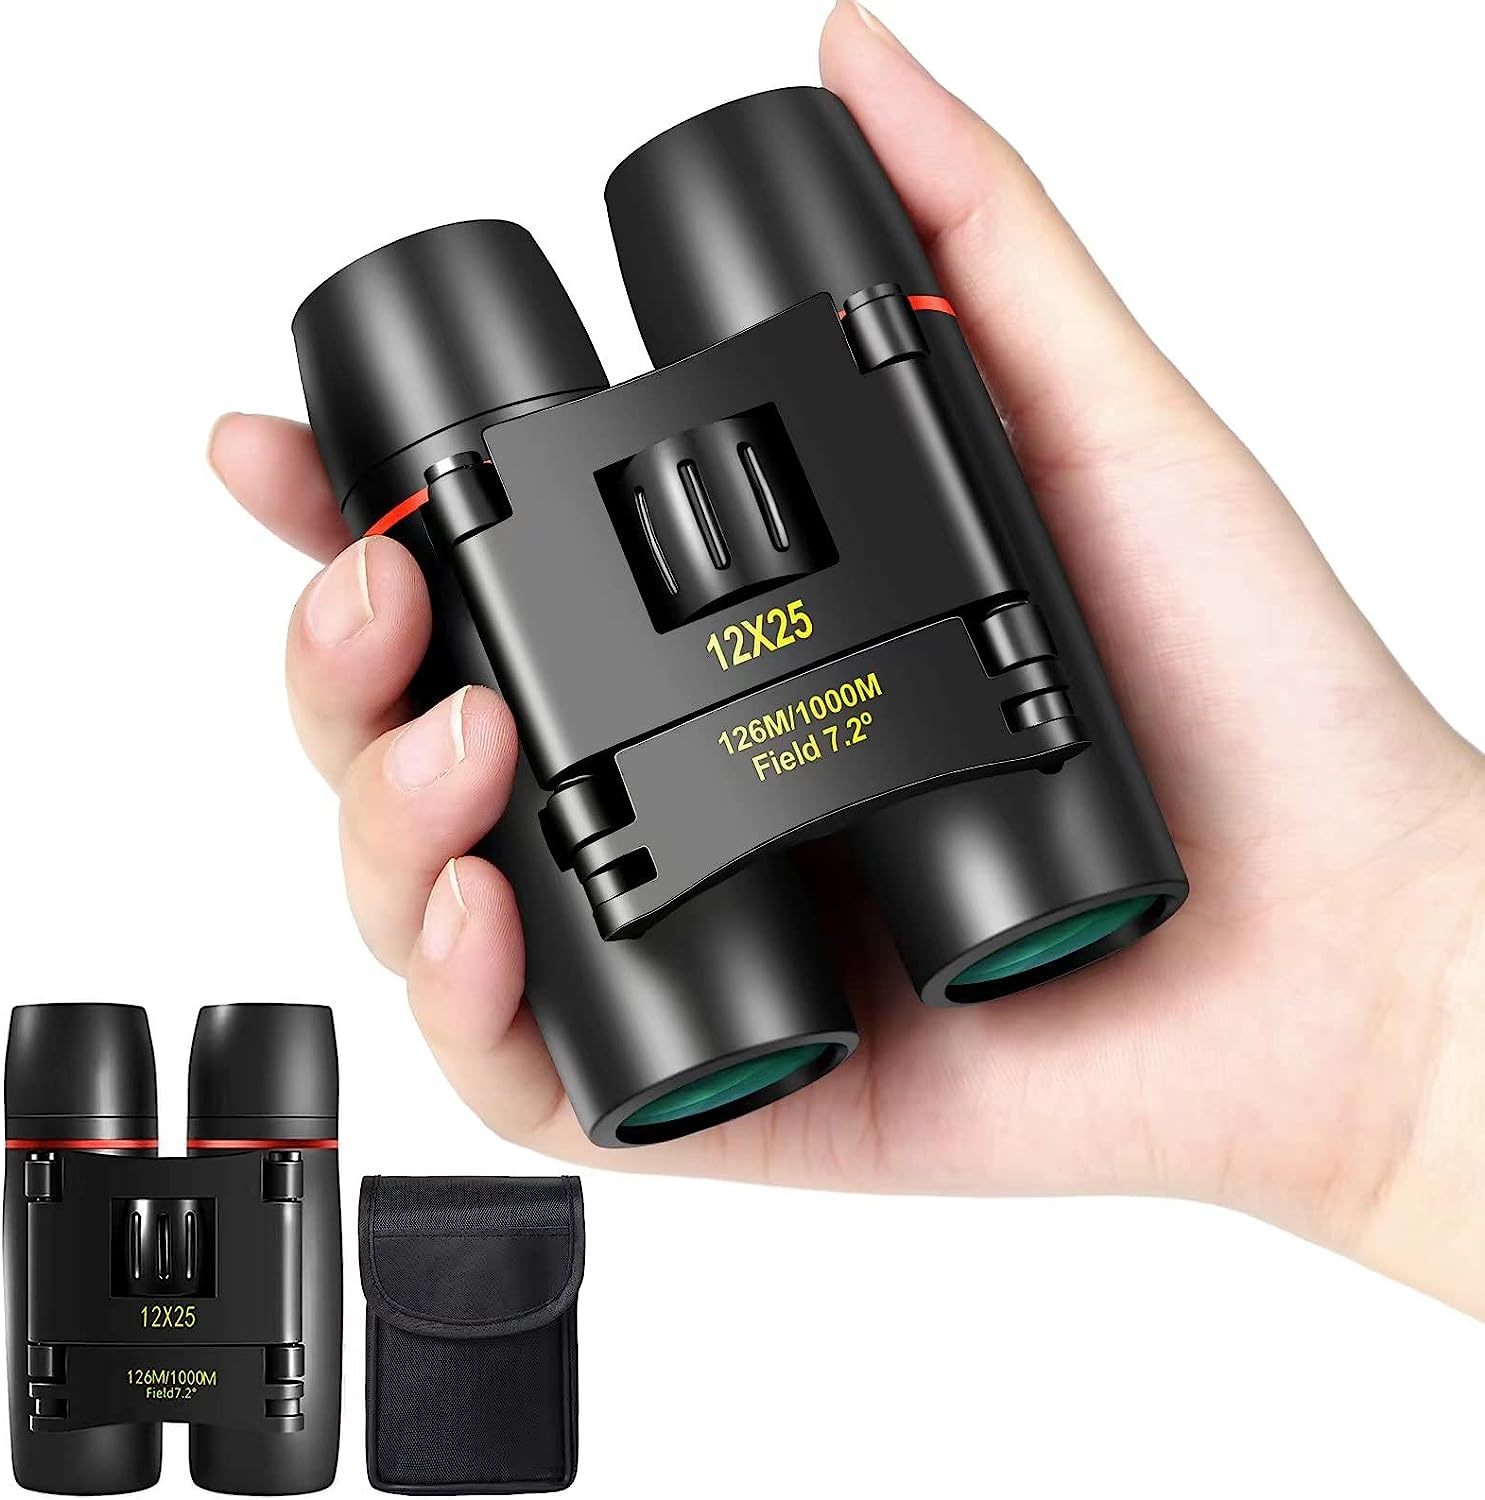 Primary image for Wrnrn 12X25 Mini Pocket Binoculars Compact, Small Lightweight, Football Game